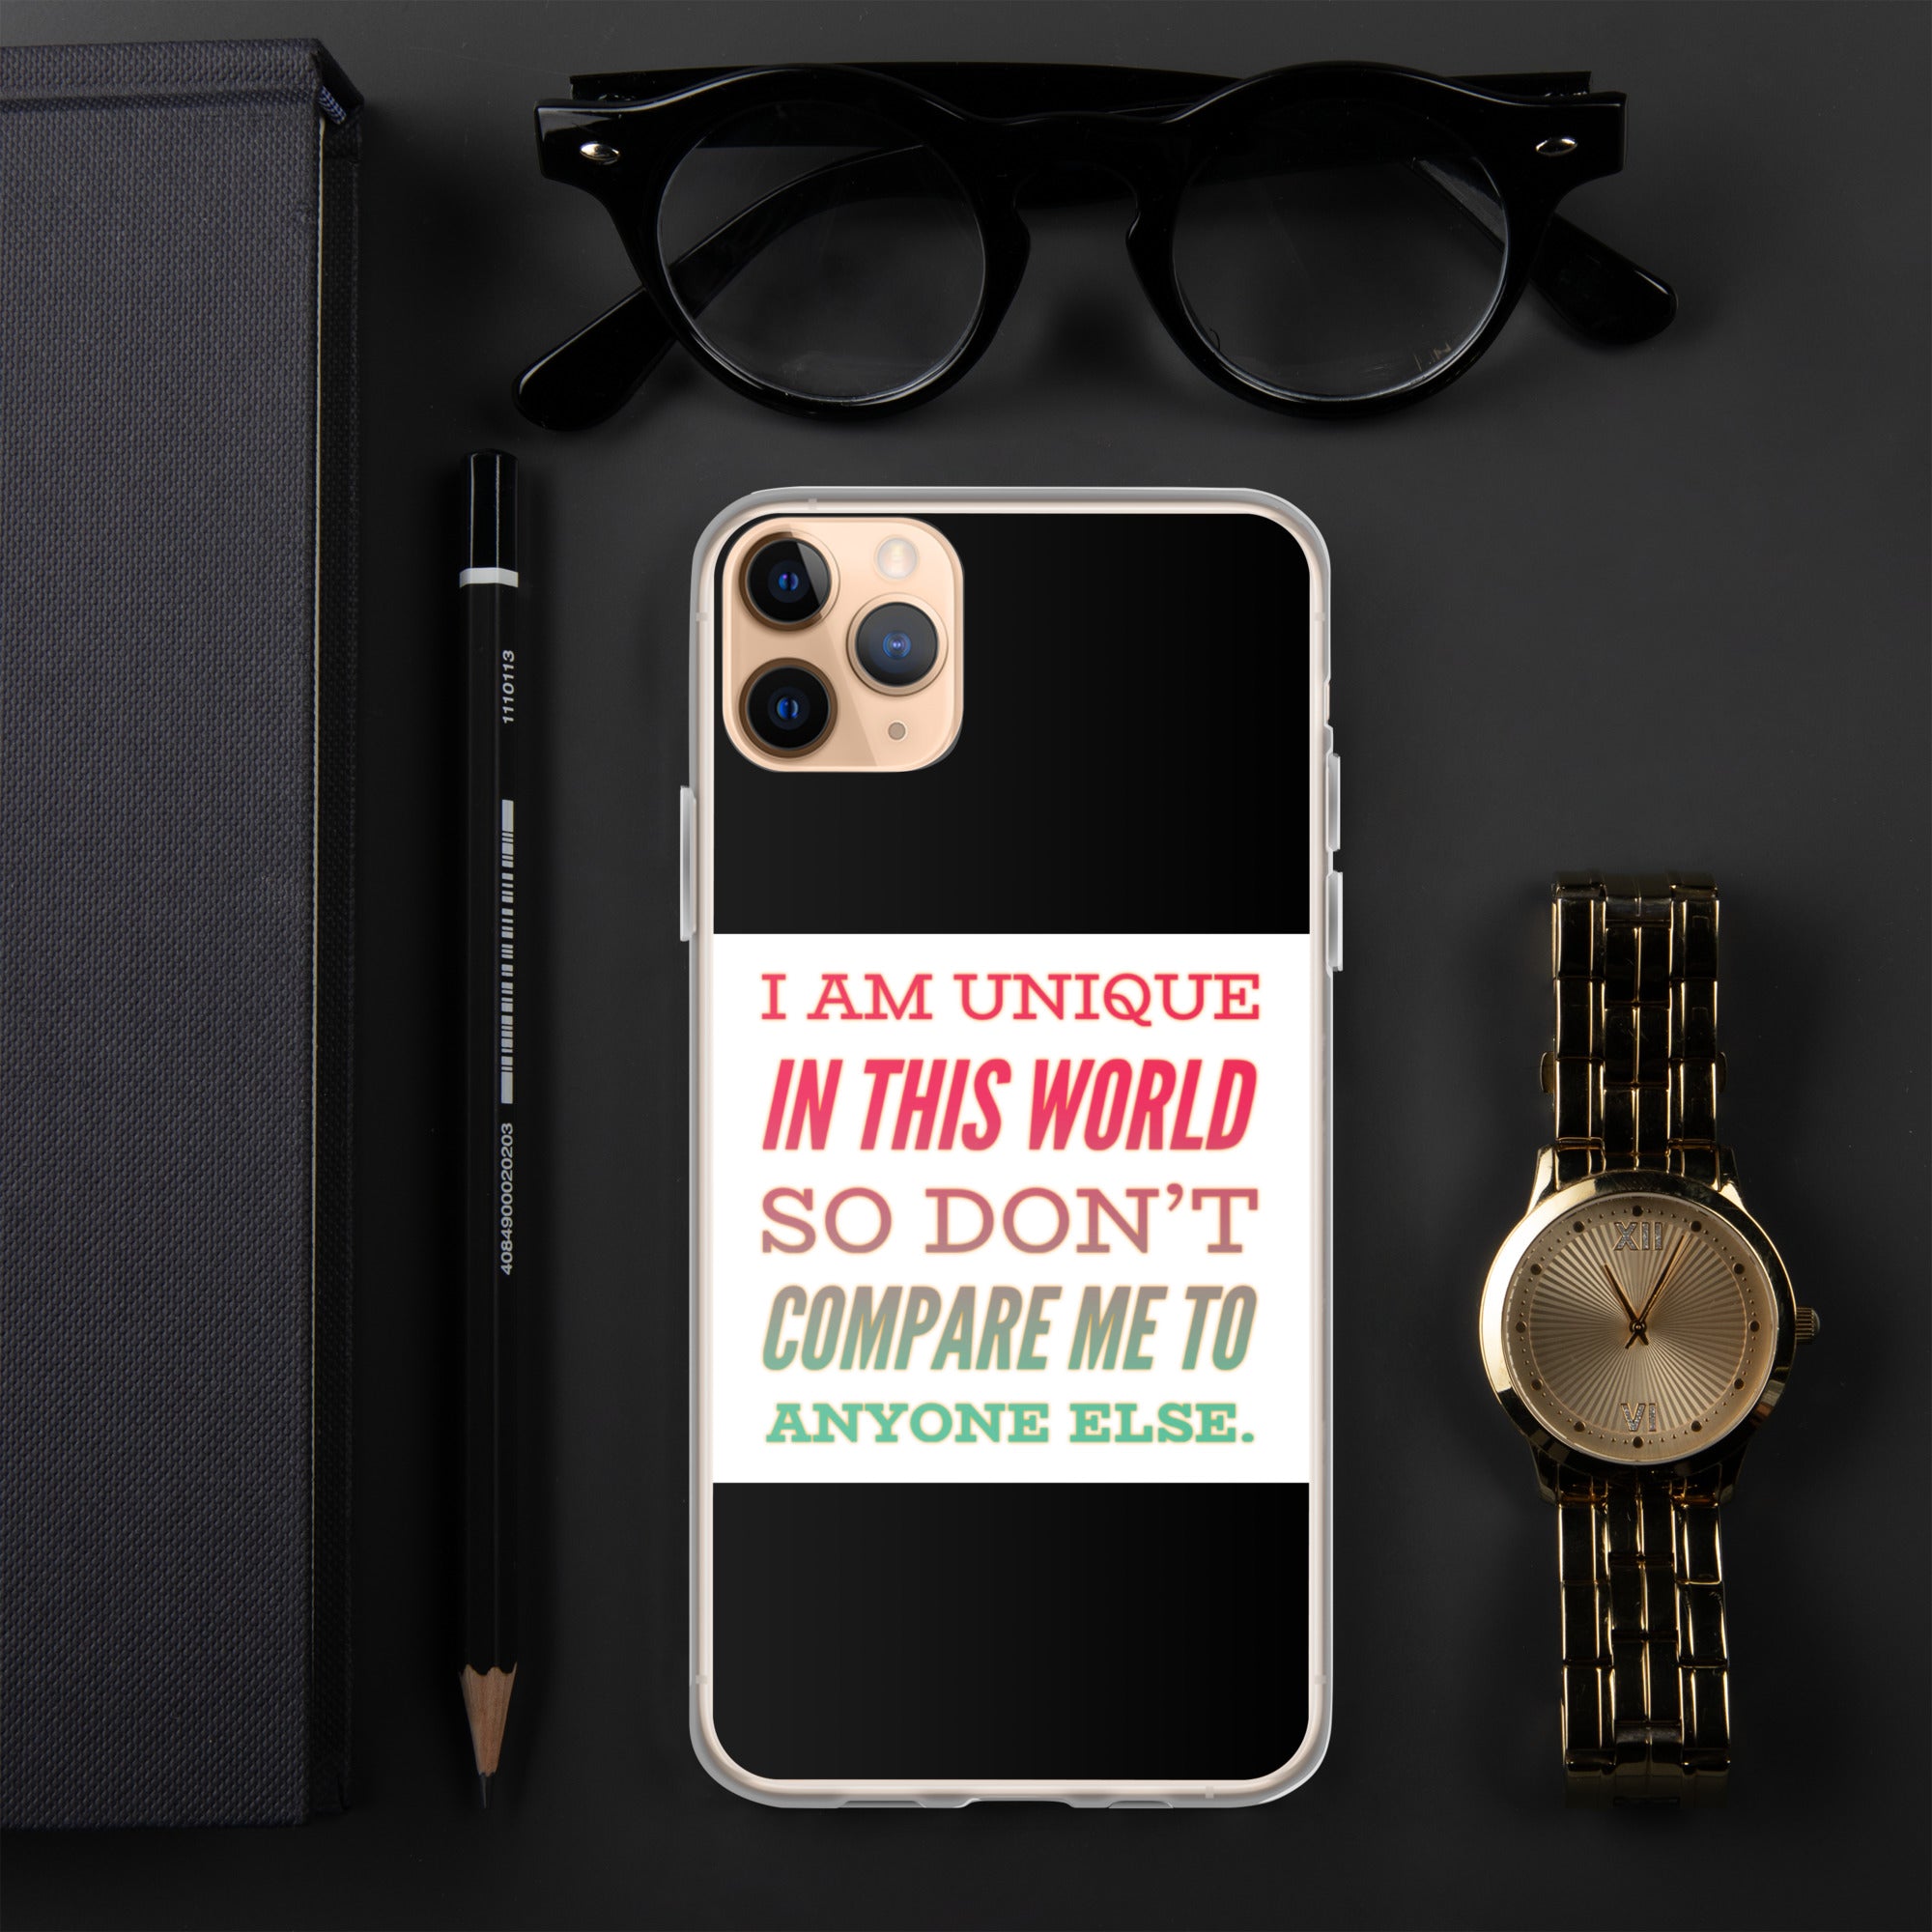 GloWell Designs - iPhone Case - Affirmation Quote - I Am Unique - GloWell Designs